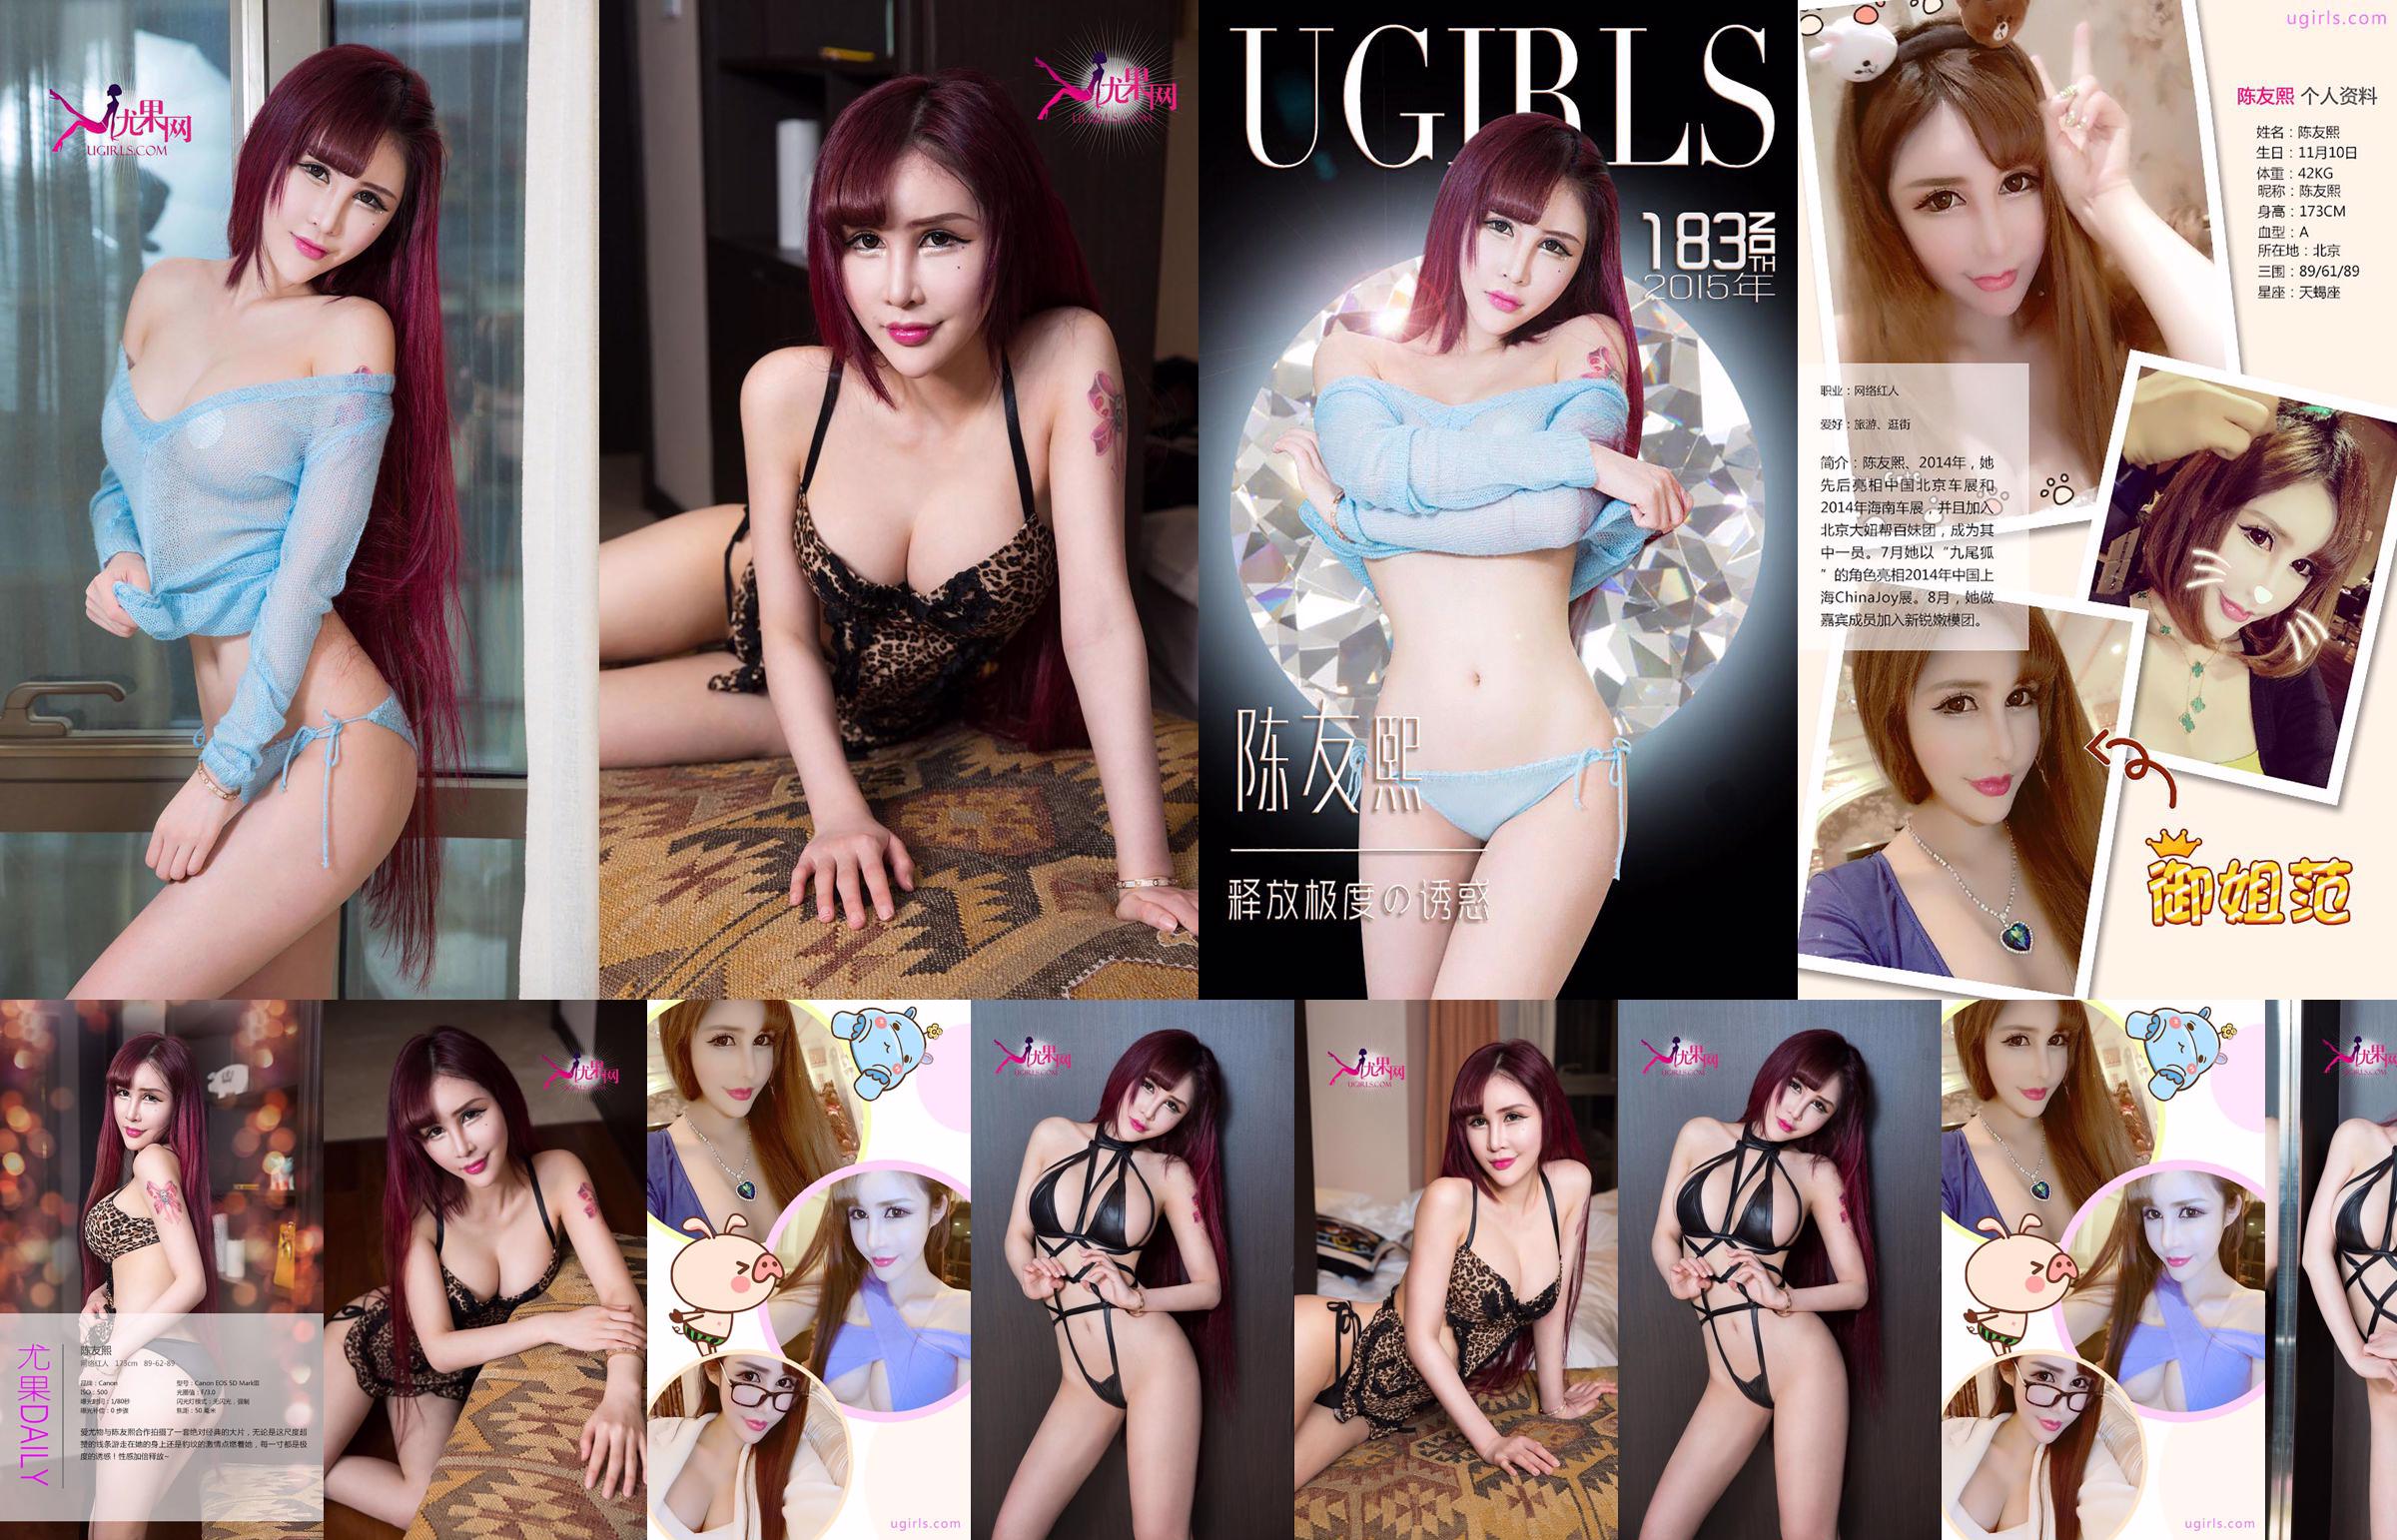 Chen Youxi "Release the Temptation of Jealousy" [爱优物Ugirls] No.183 No.aafcef Page 1